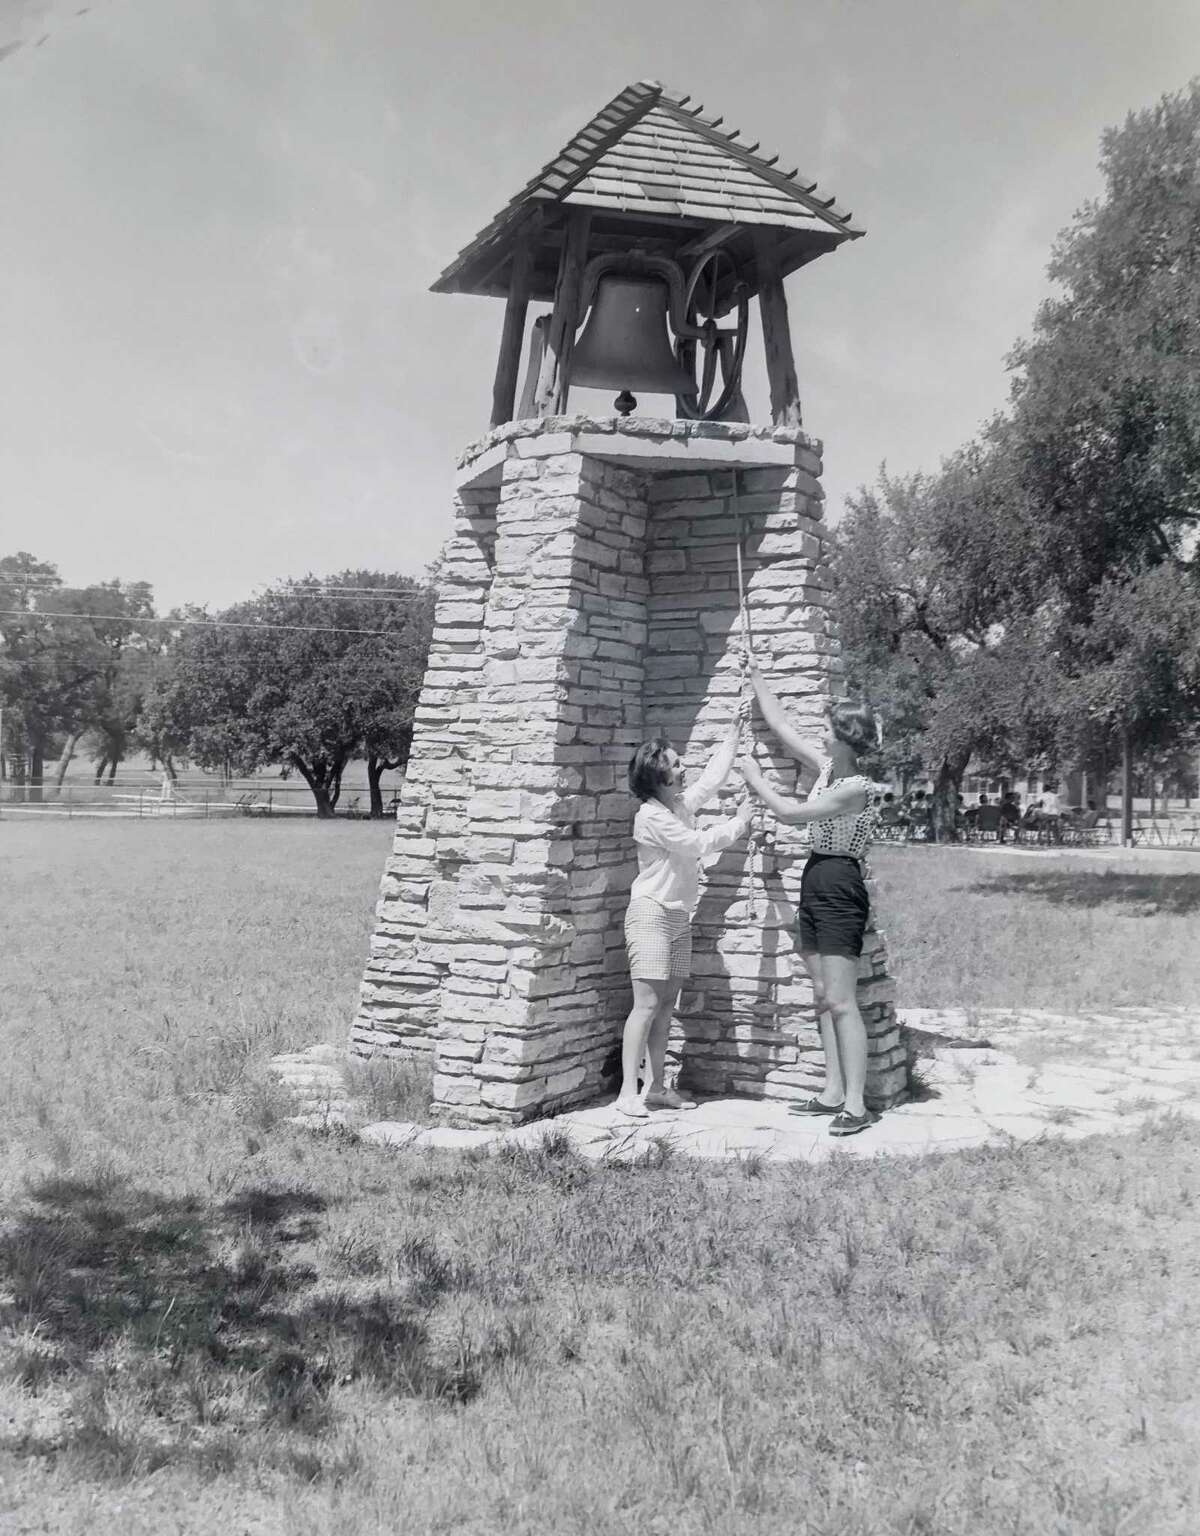 The bell tower at Camp Capers was rung by campers to signal mealtimes, swimming or the end of the rest period, as shown in this 1962 photo.